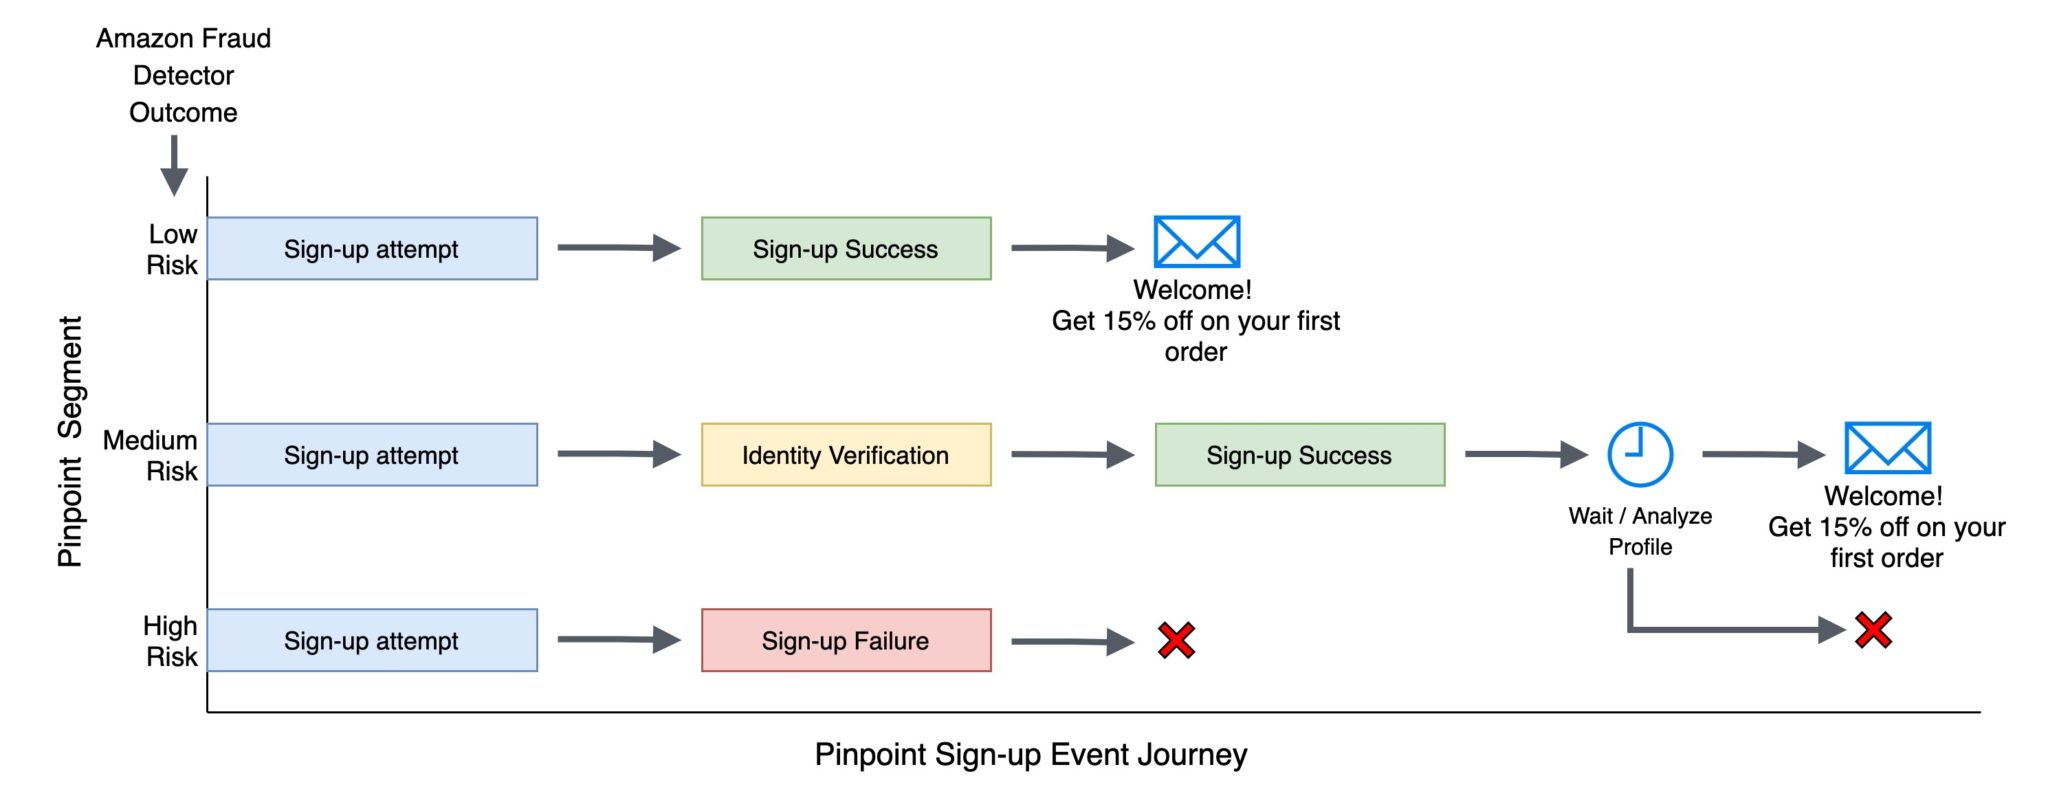 Segments of users by their sign-up risk scores. It also shows the user sign-up event journey that can be set up in Amazon Pinpoint to drive additional functionality such as running effective marketing campaigns for trusted users with low sign-up risk scores